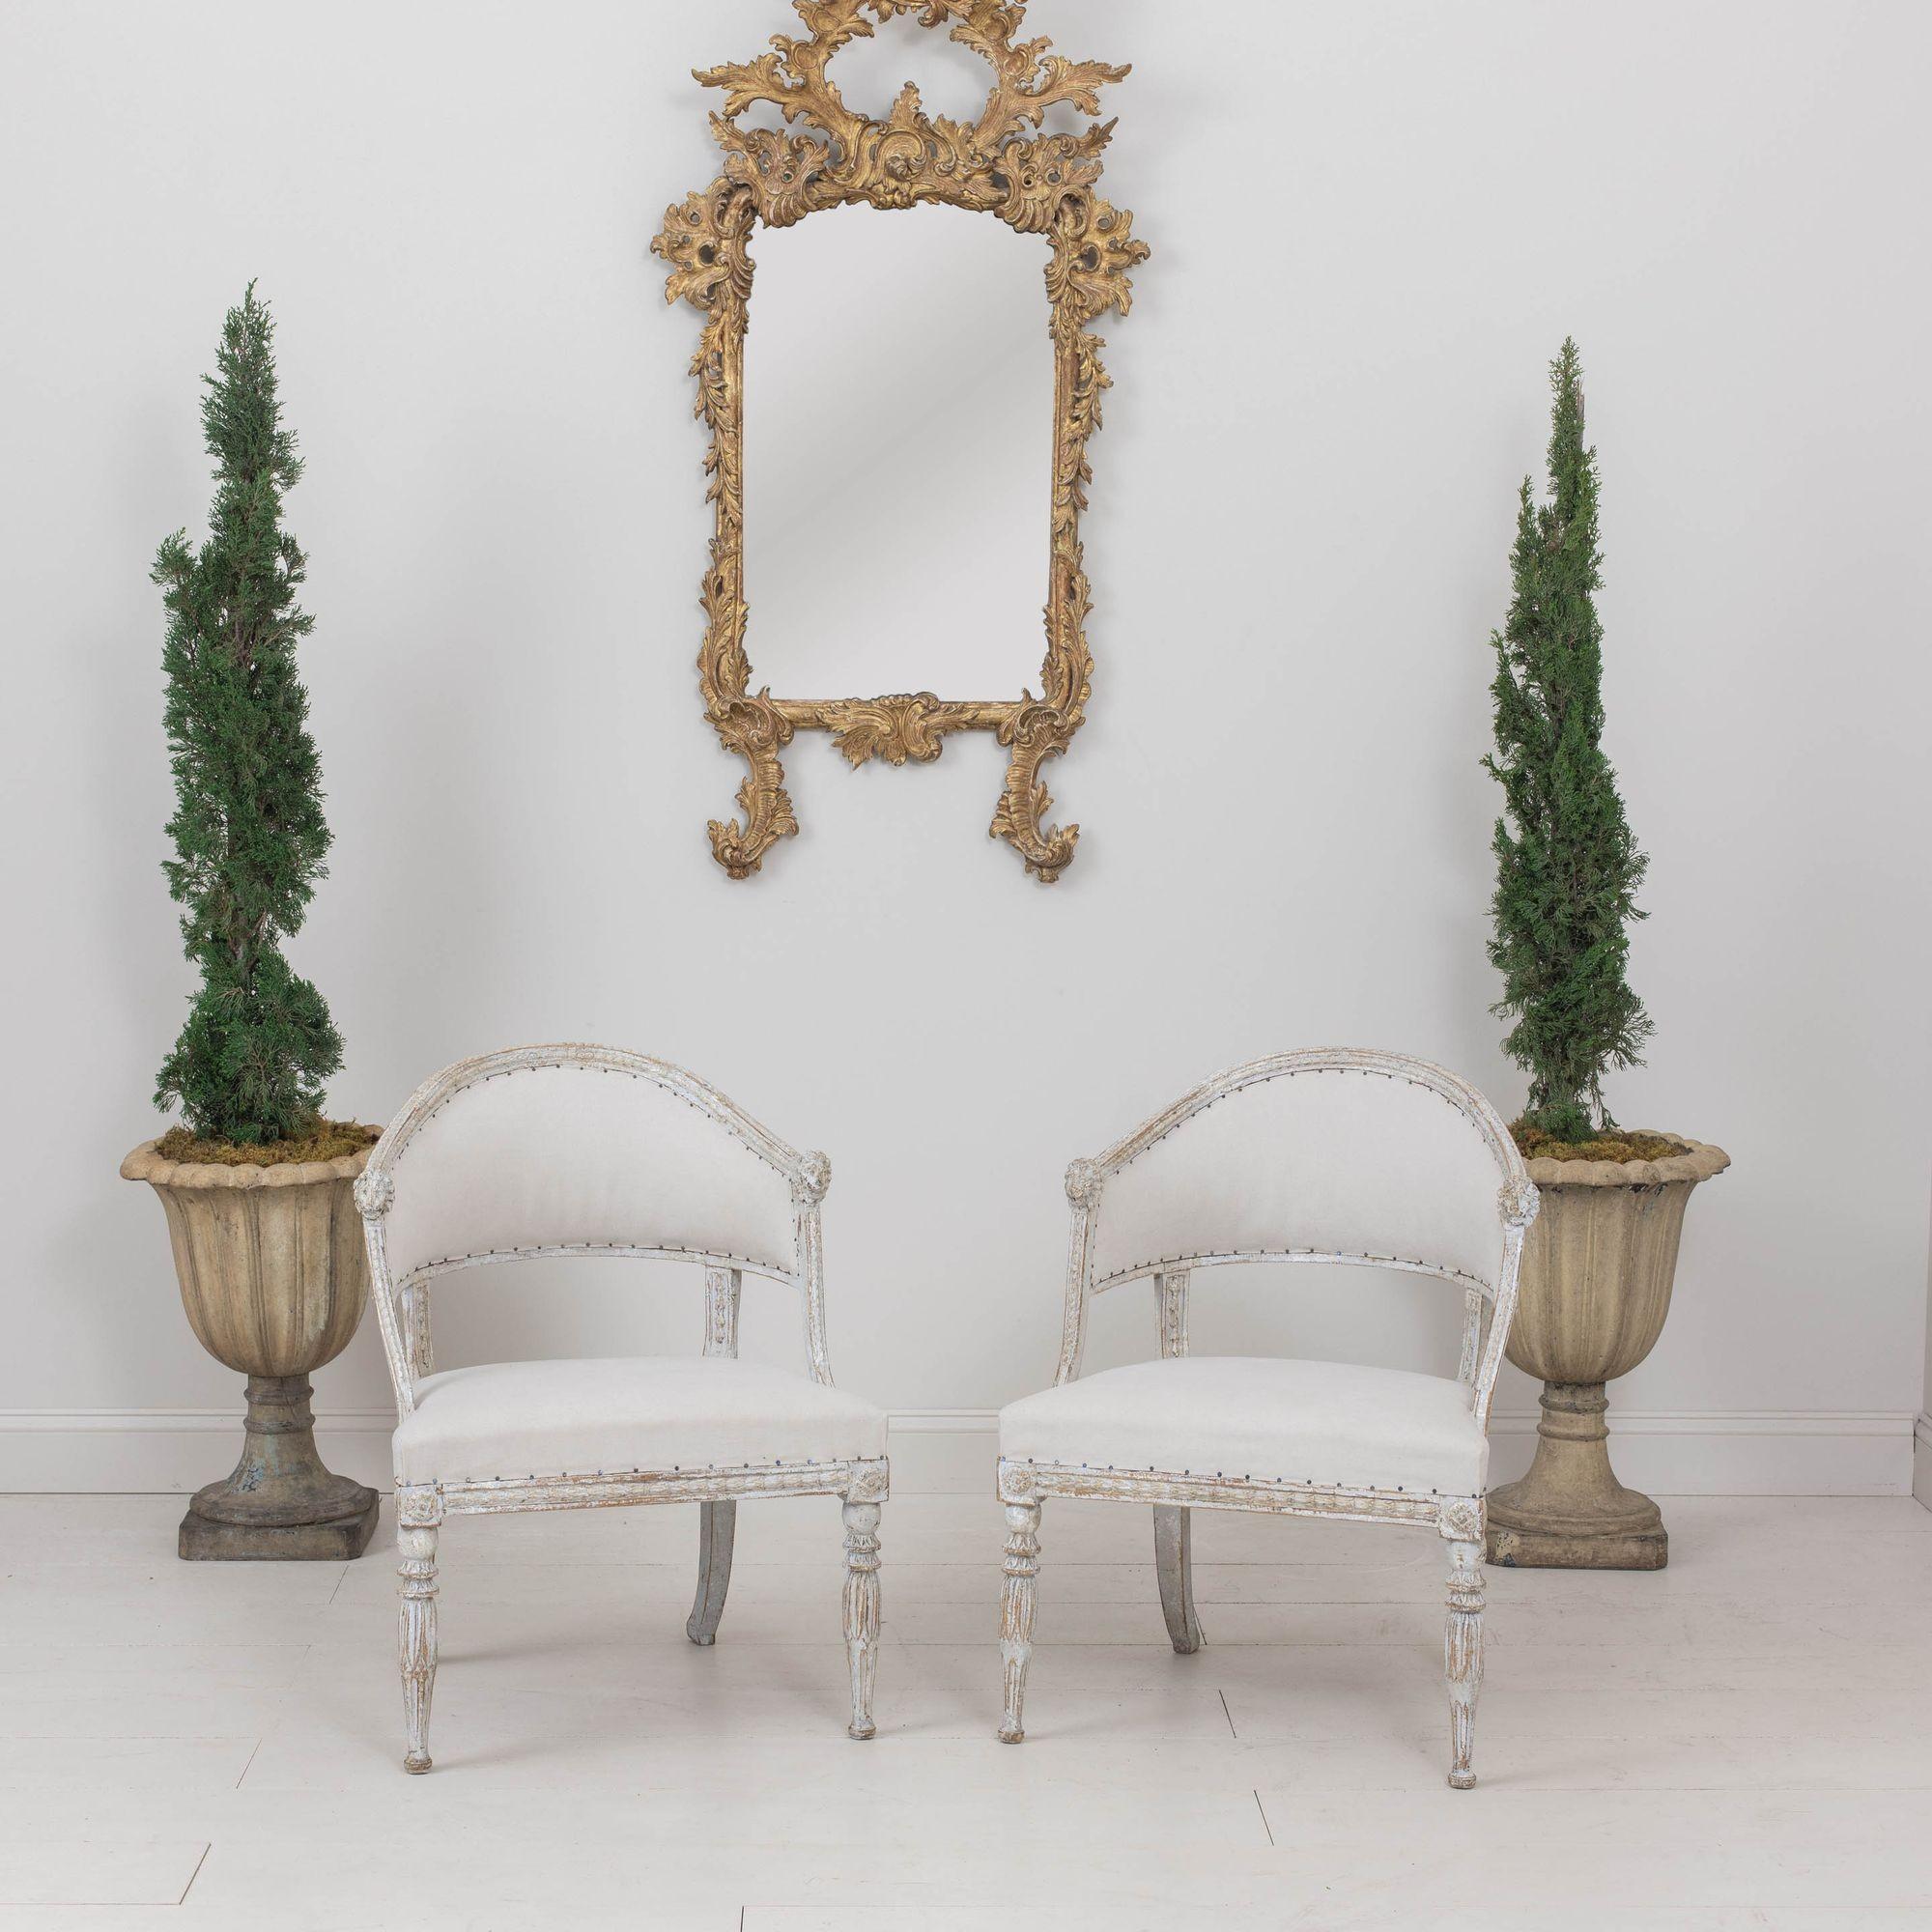 A pair of Swedish antique barrel back armchairs from the Gustavian period, circa 1810. These stunning chairs have shaped barrel backs with lion head carvings. The frame features carved bell flowers with front legs adorned with lotus flowers and